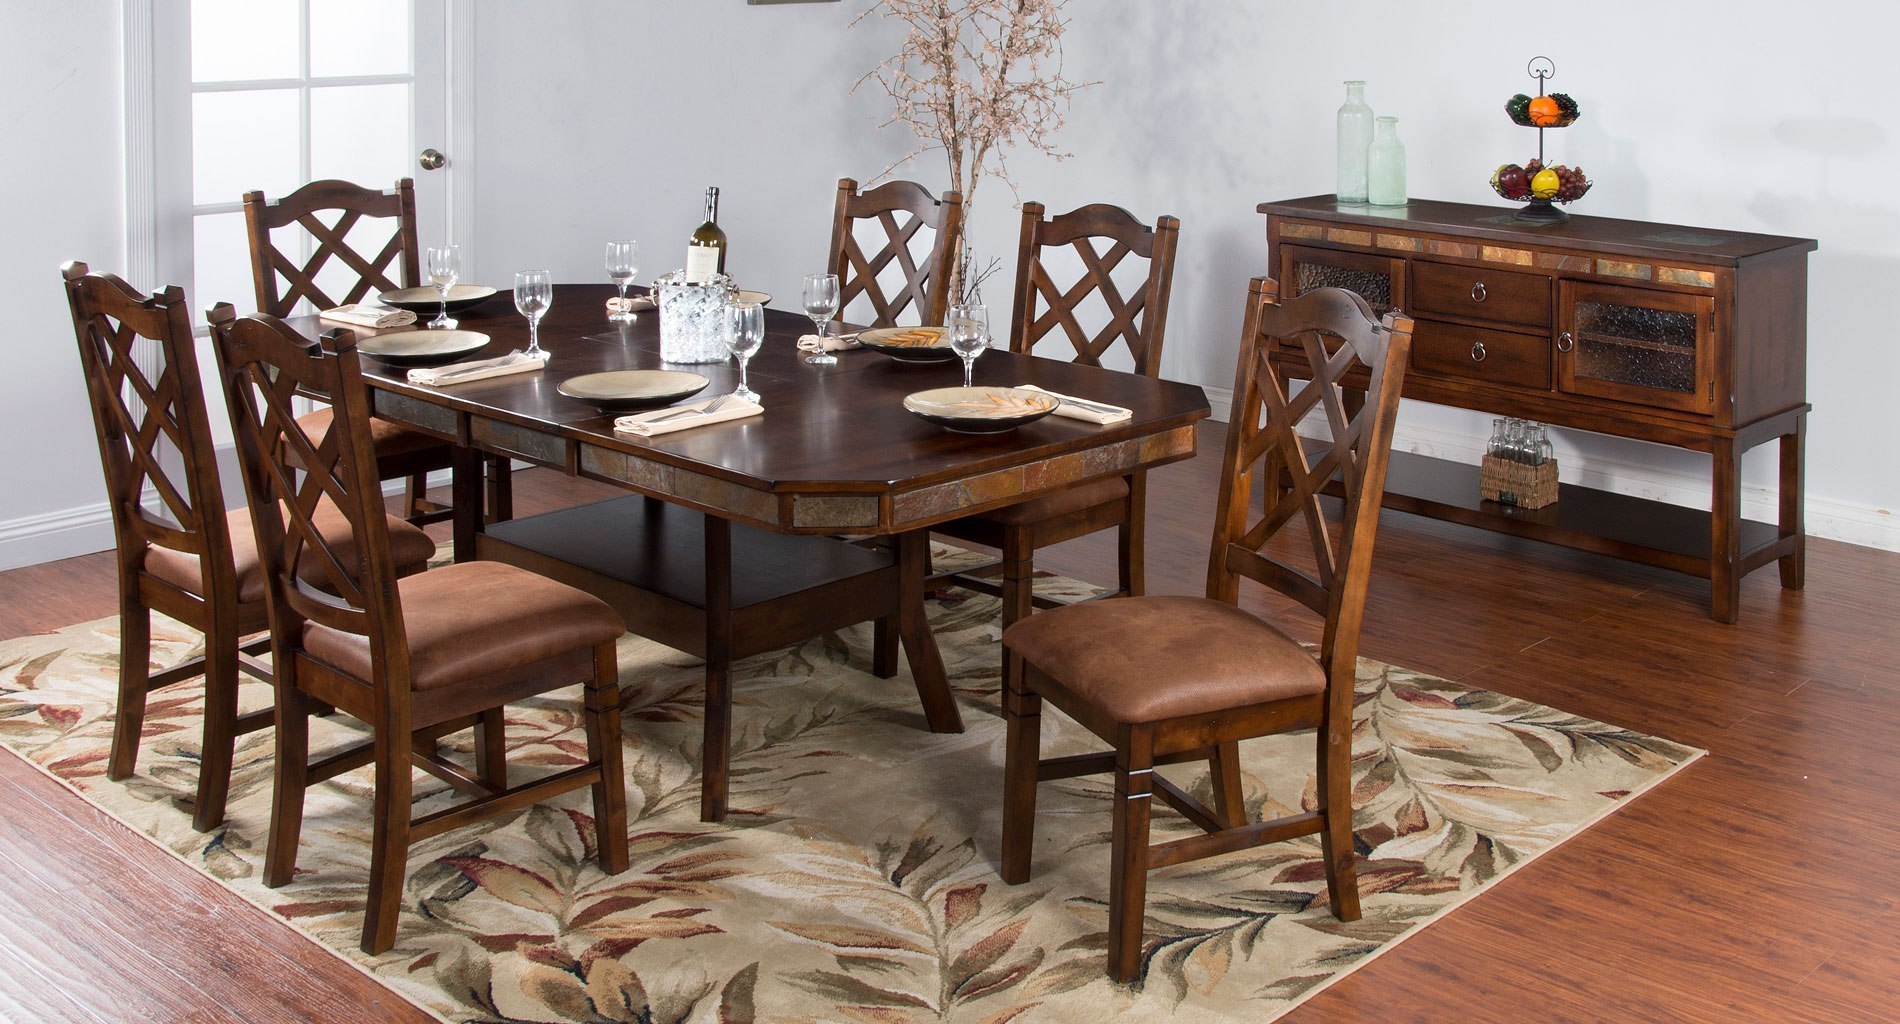 Santa Fe Style Dining Room Chairs